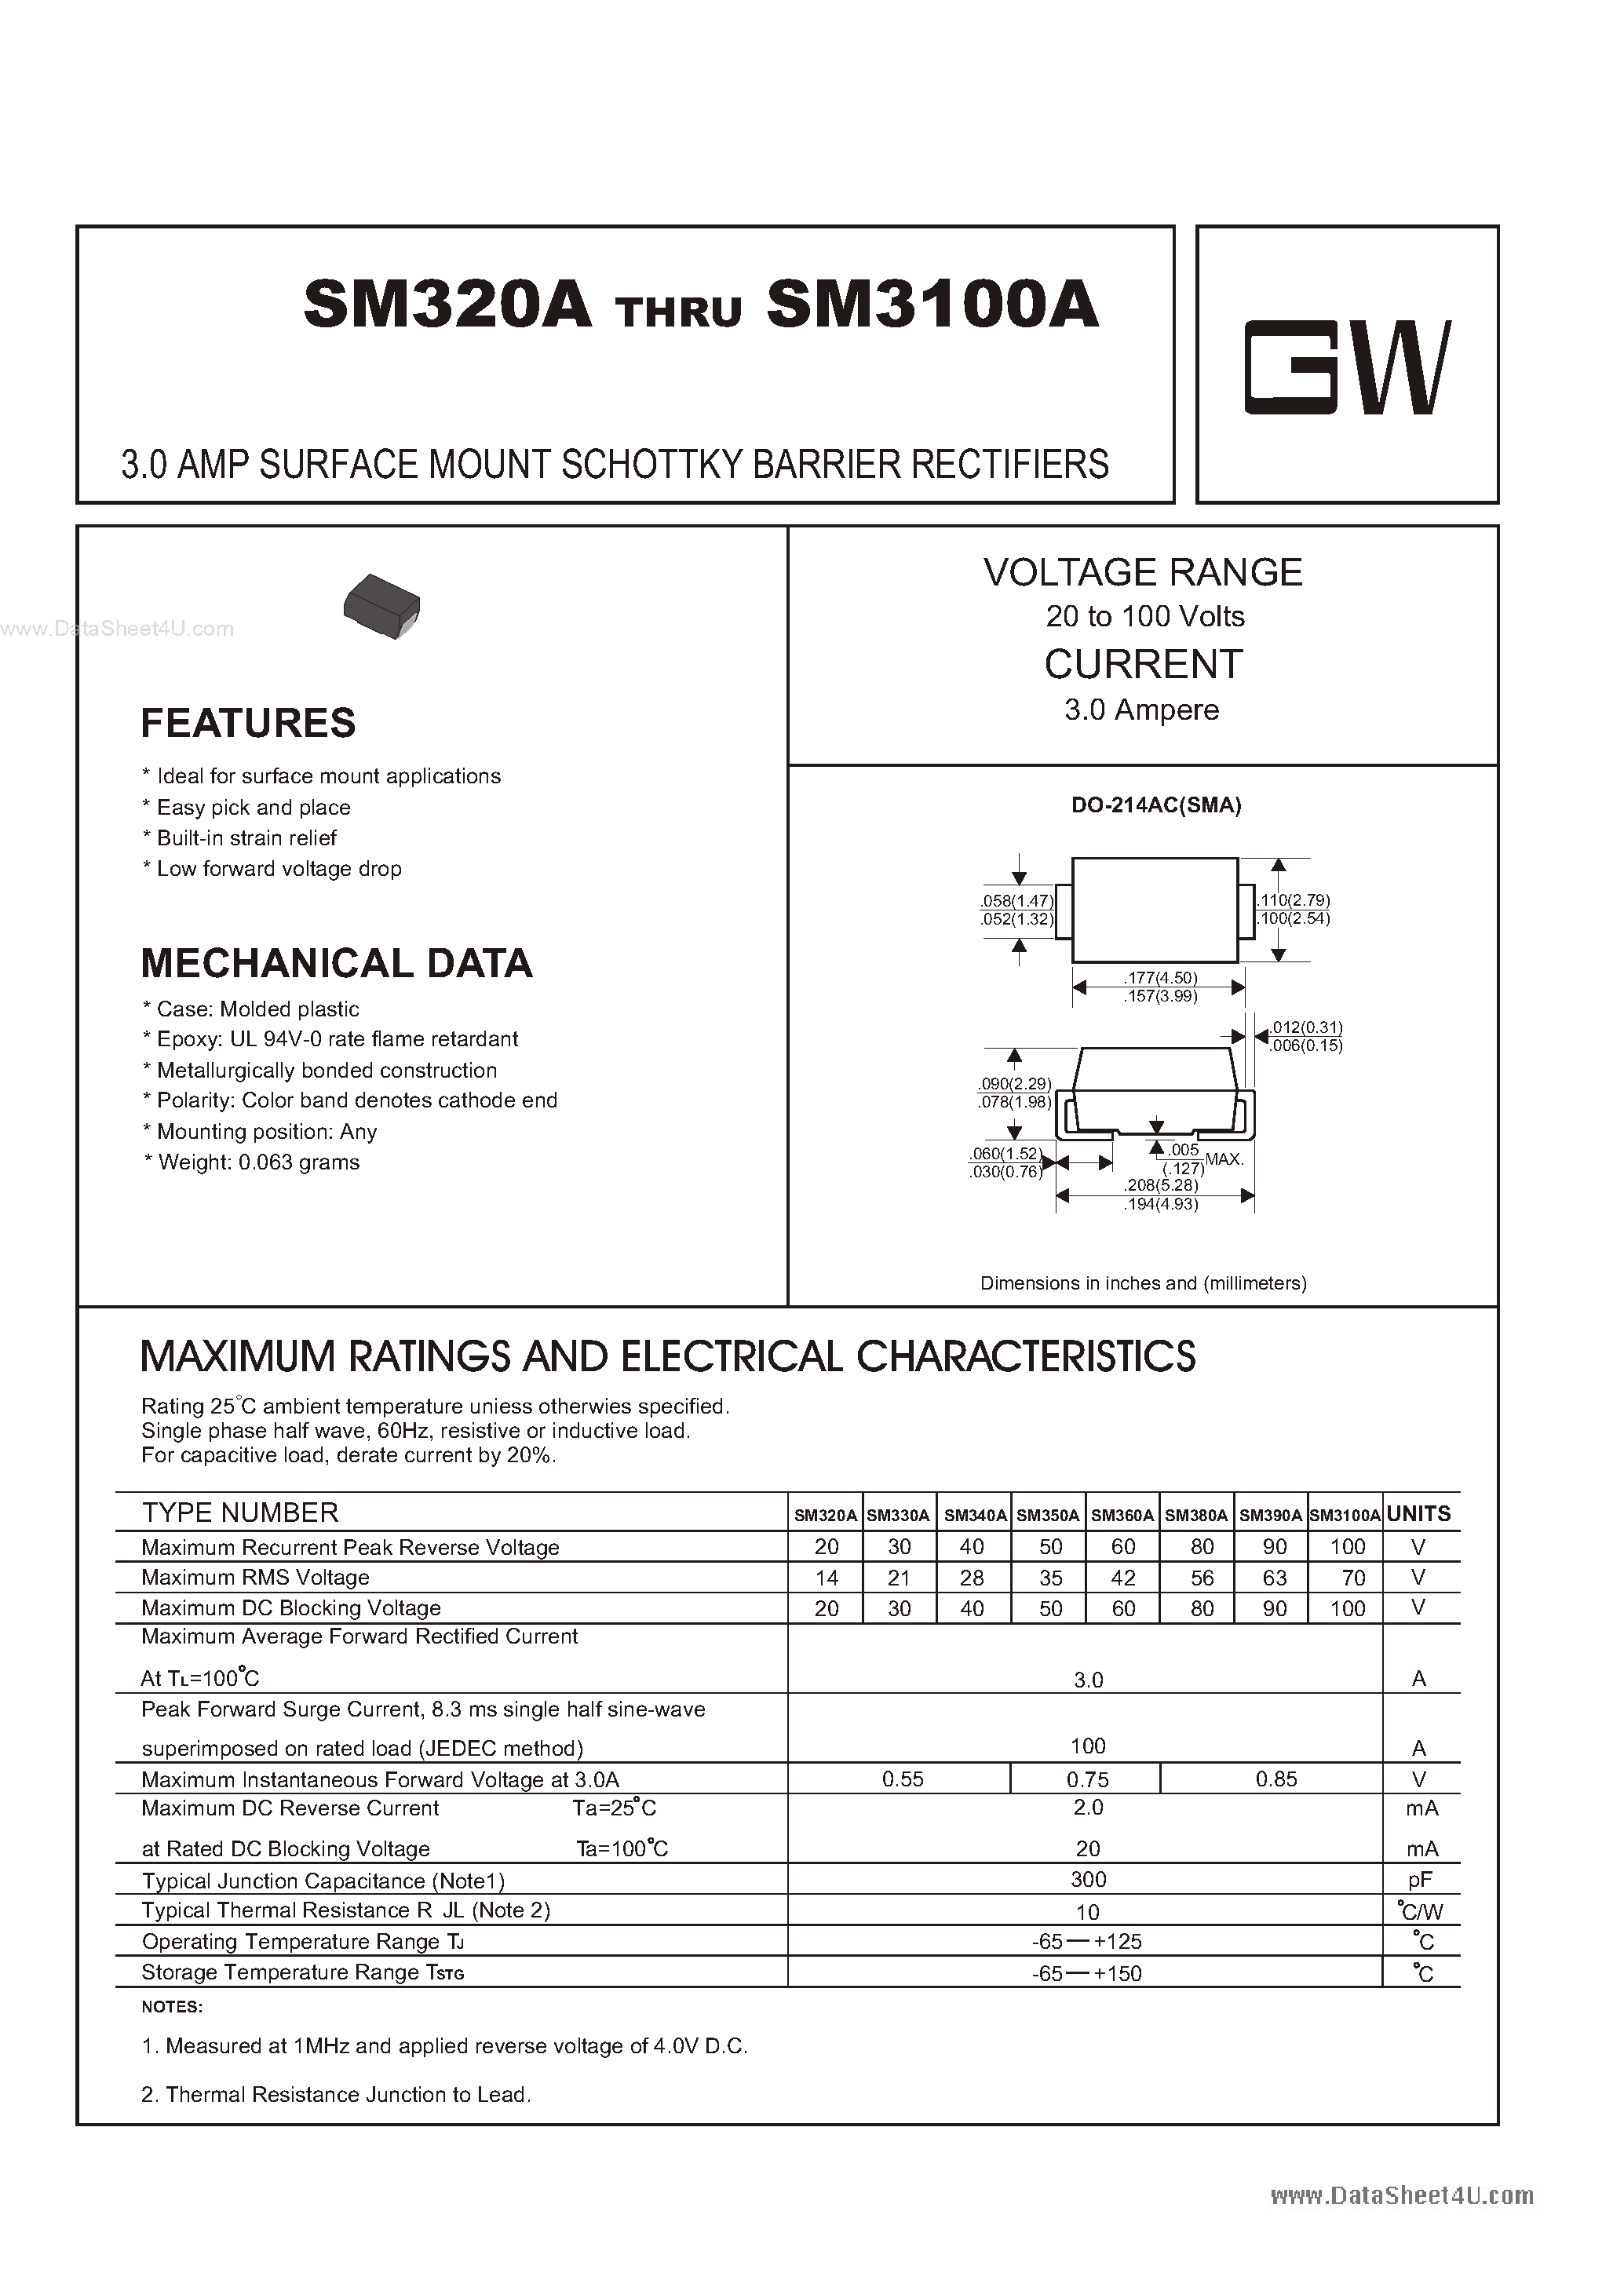 Datasheet SM3100A - (SM320A - SM3100A) 3.0 AMP SURFACE MOUNT SCHOTTKY BARRIER RECTIFIERS page 1